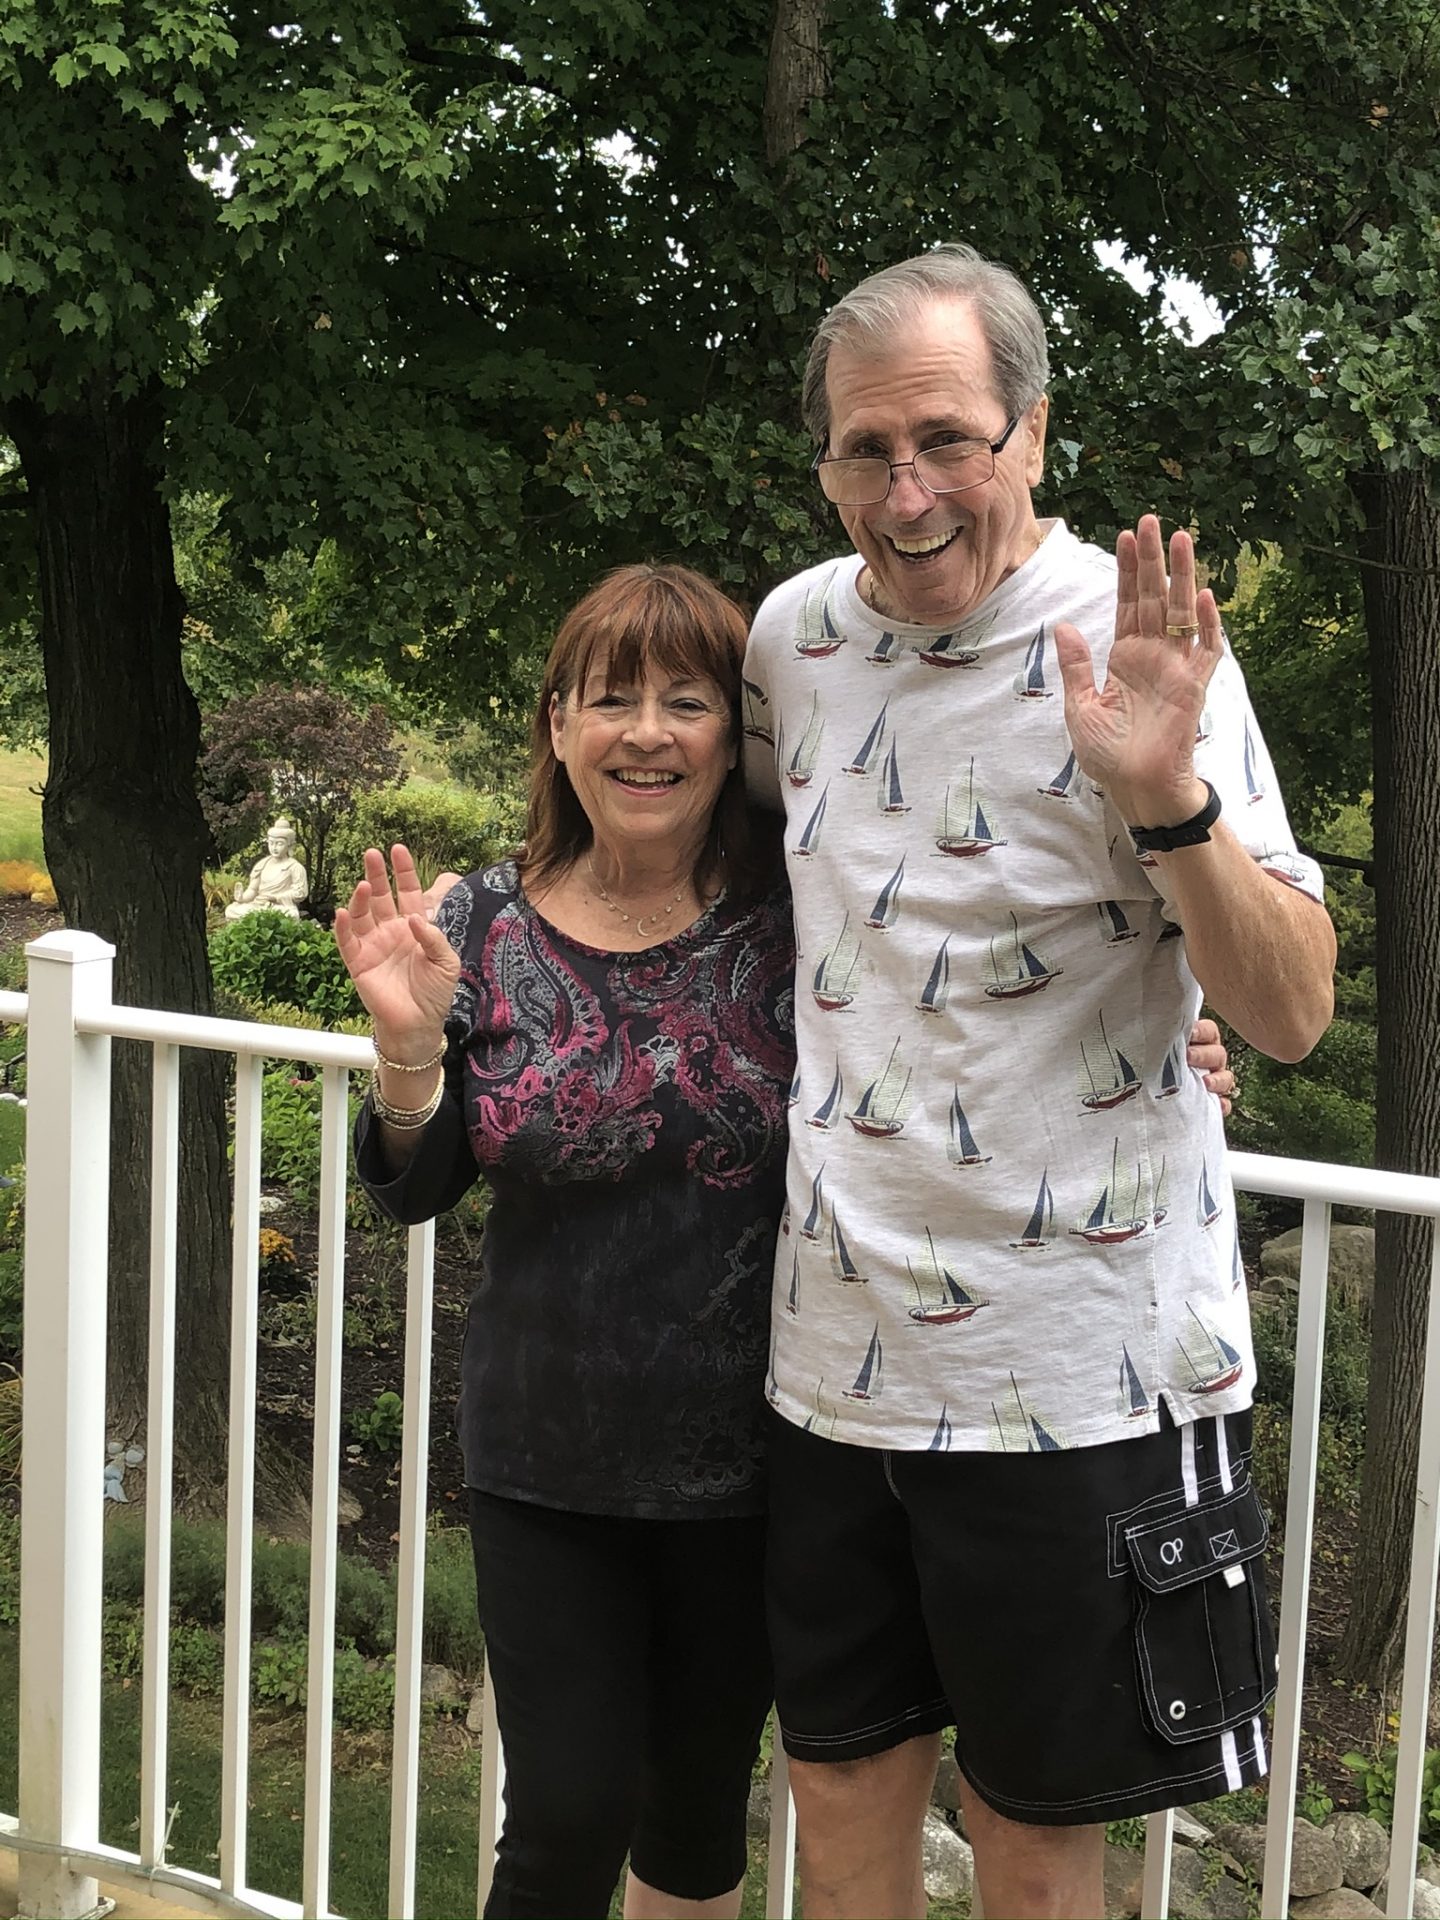 Sadly the last photo taken in Crystal Springs as John and Debbie We’re about to leave on their adventure to Florida<br />
Im so sorry John that I wasn’t able to get down there to see you and Debbi and your new habitat!  Missed you guys the moment you left! And will forever! ❤️U!